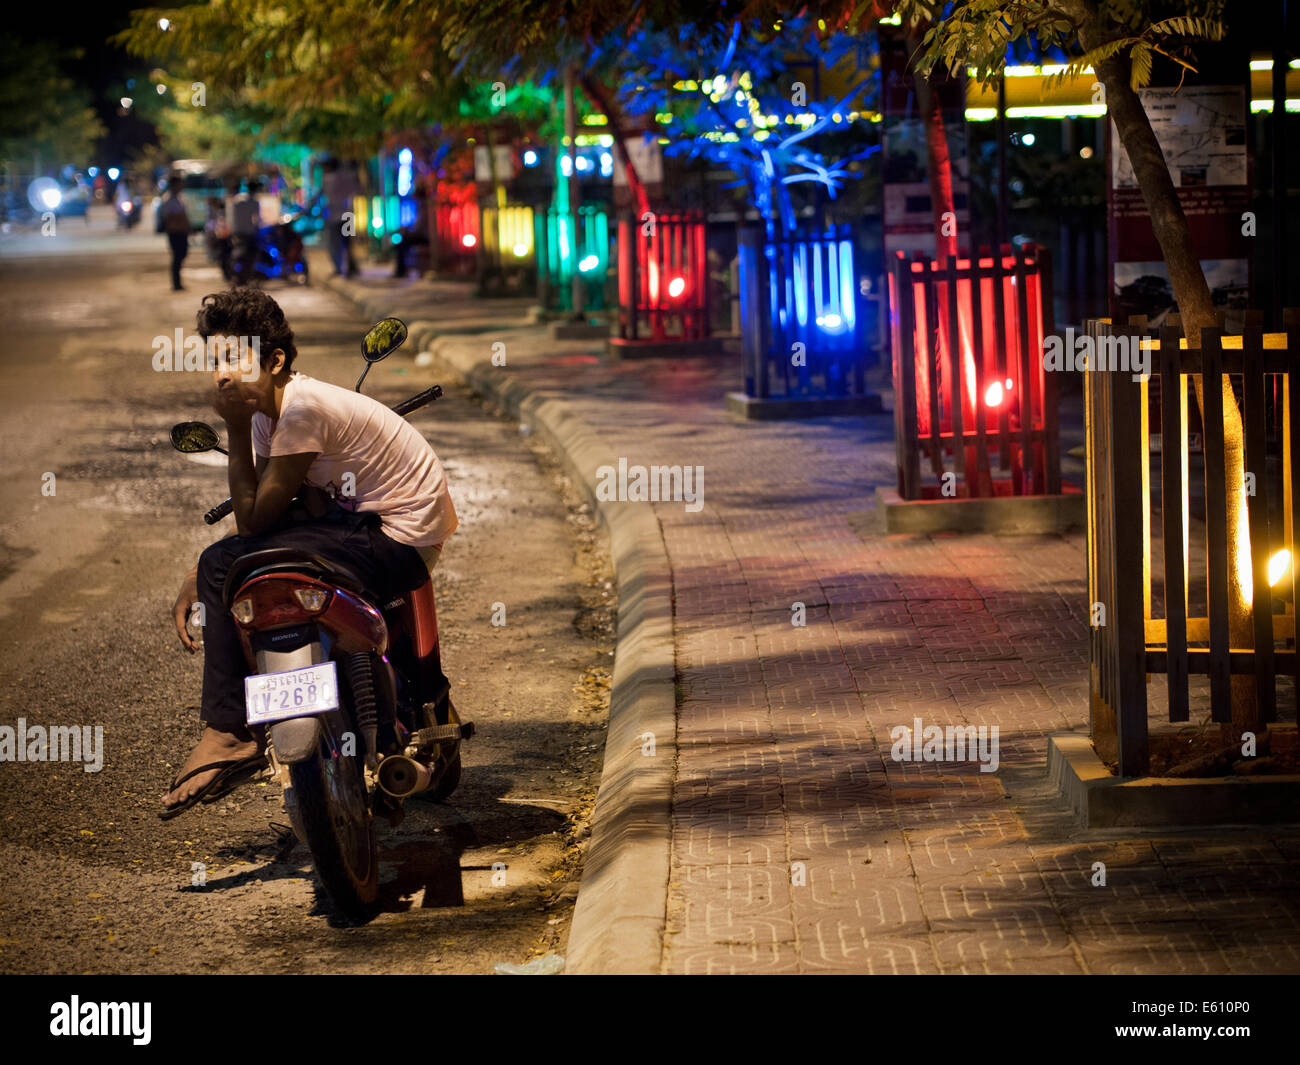 A view of a Cambodia teen sitting on his motorcycle on a street in Siem Reap, Cambodia. Stock Photo